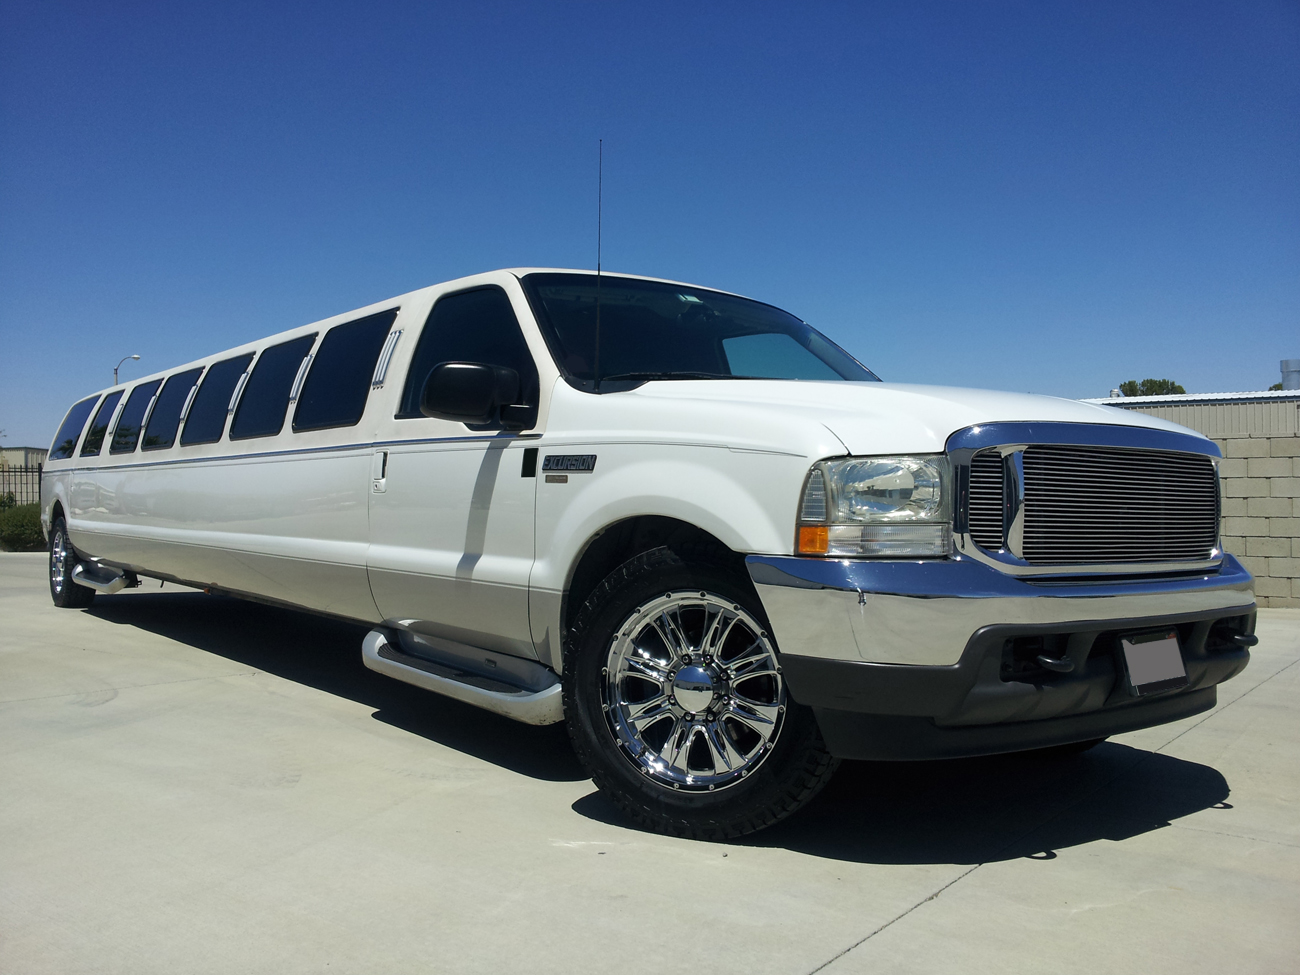 What are different events that require Luxury Limousine?